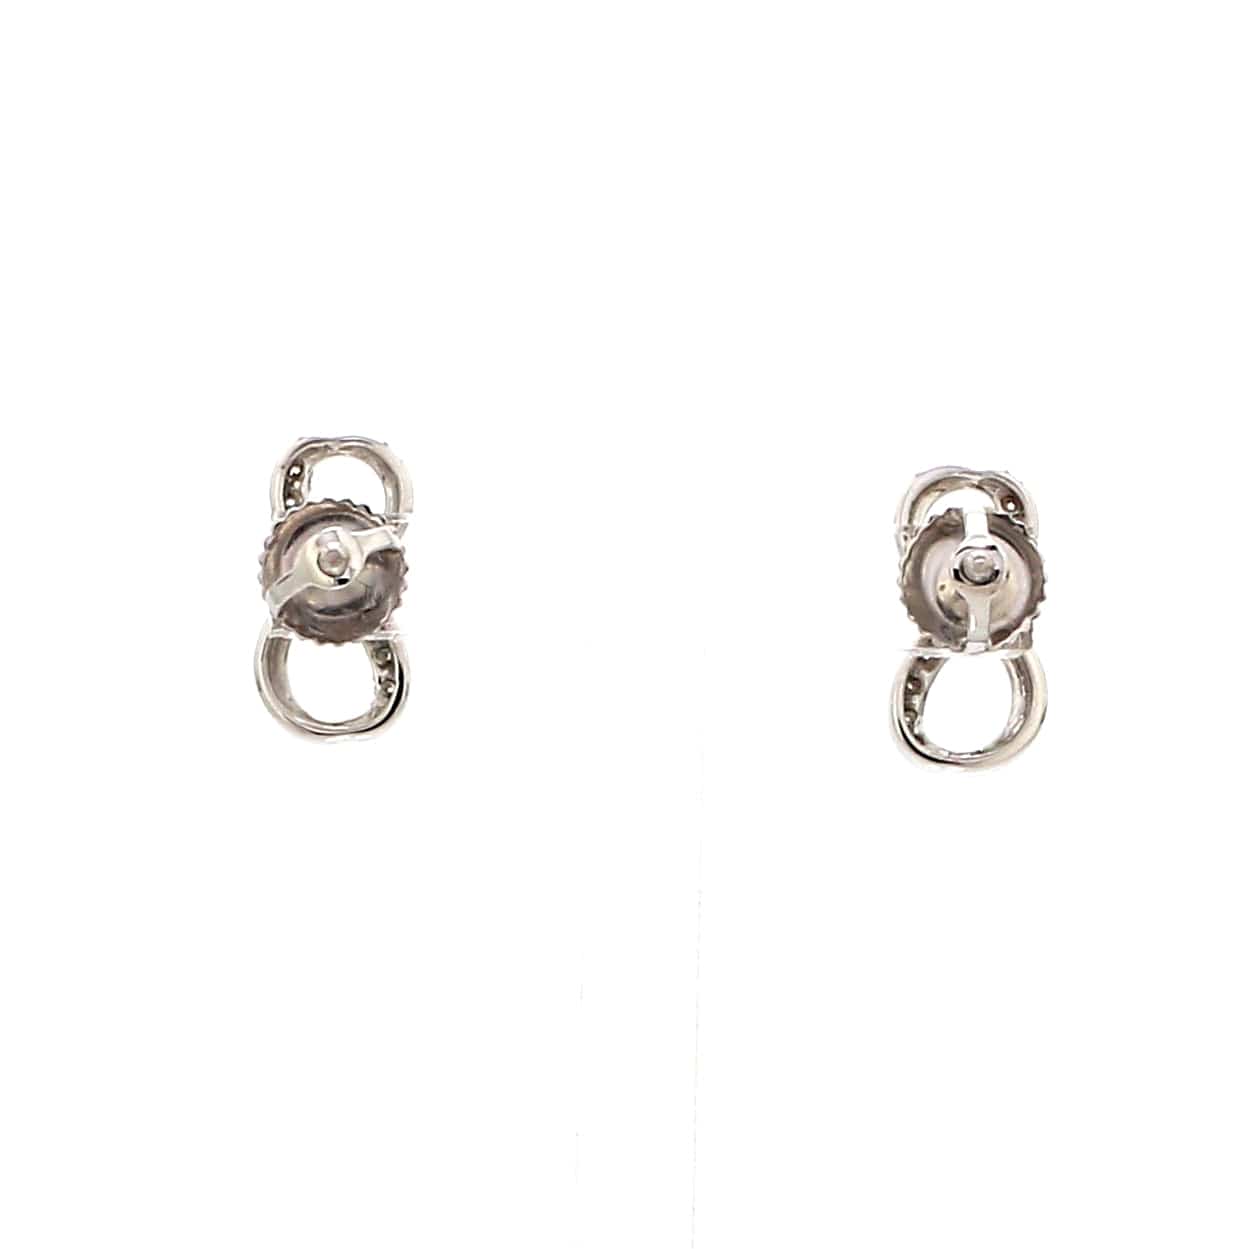 Discover more than 165 gucci safety pin earring